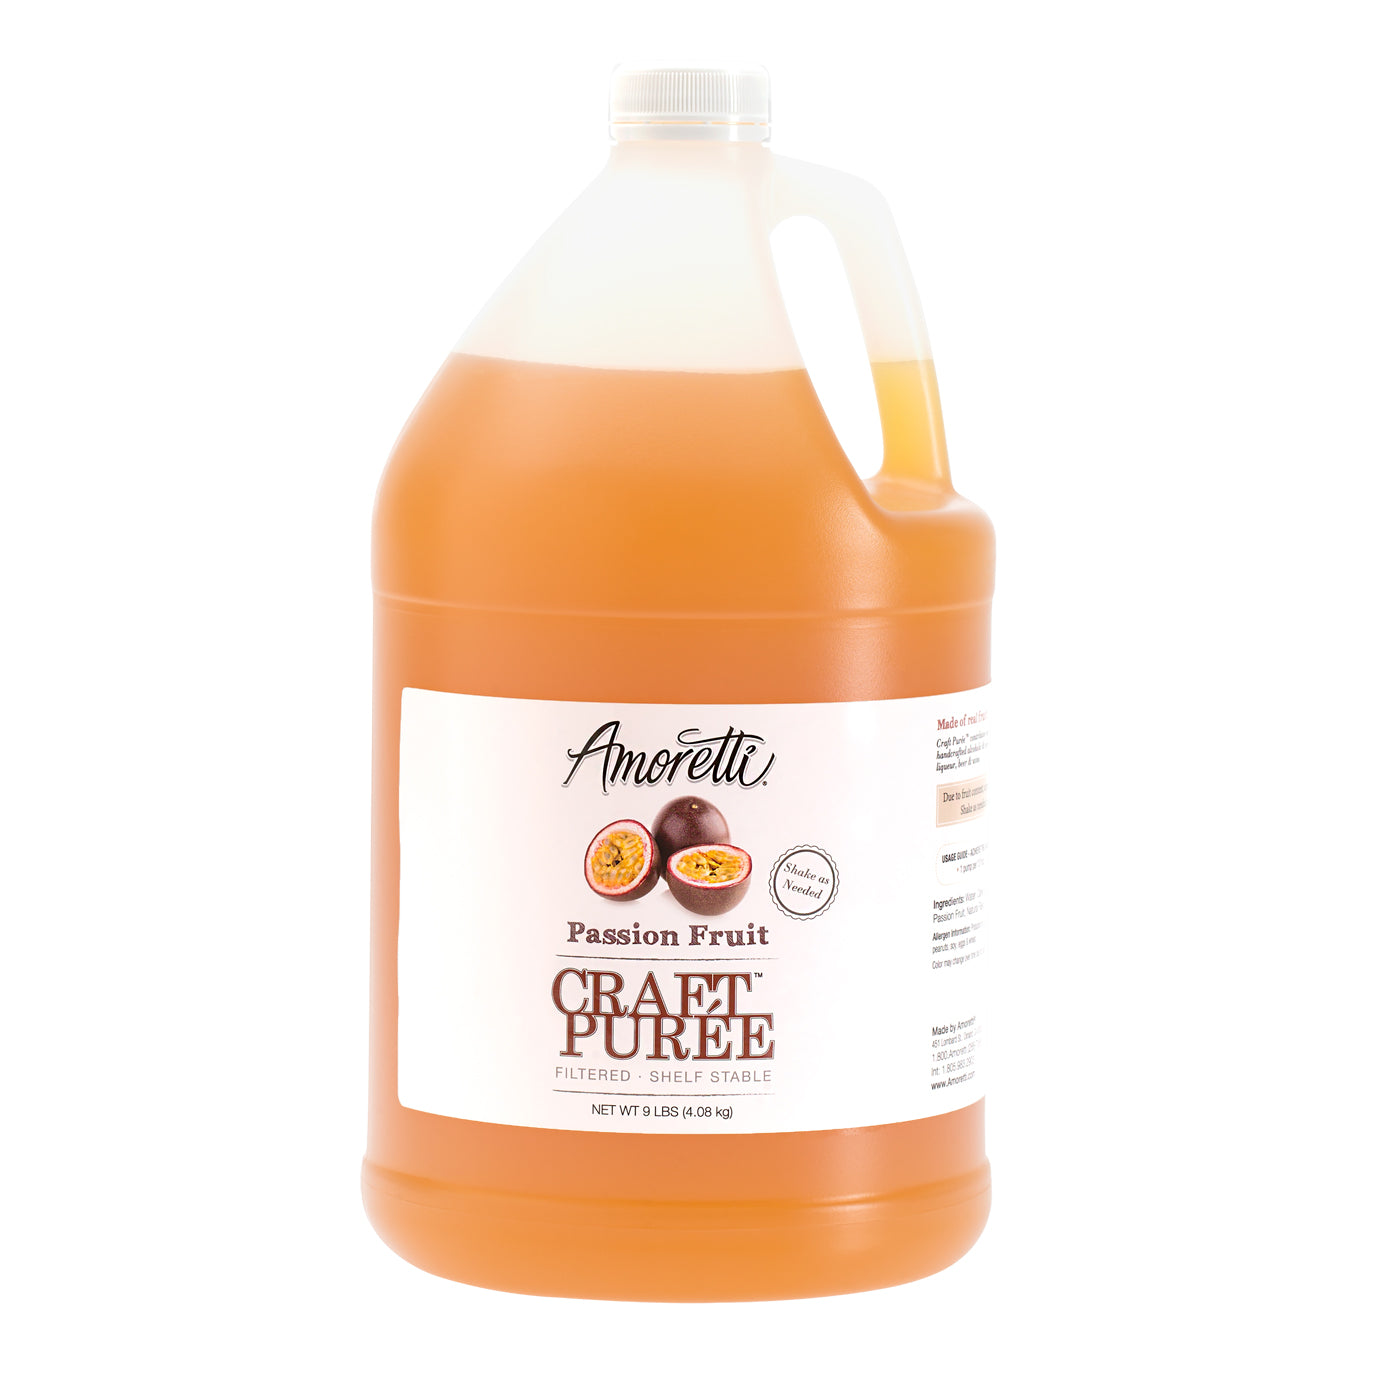 Fantasty Passion Fruit Puree - Products